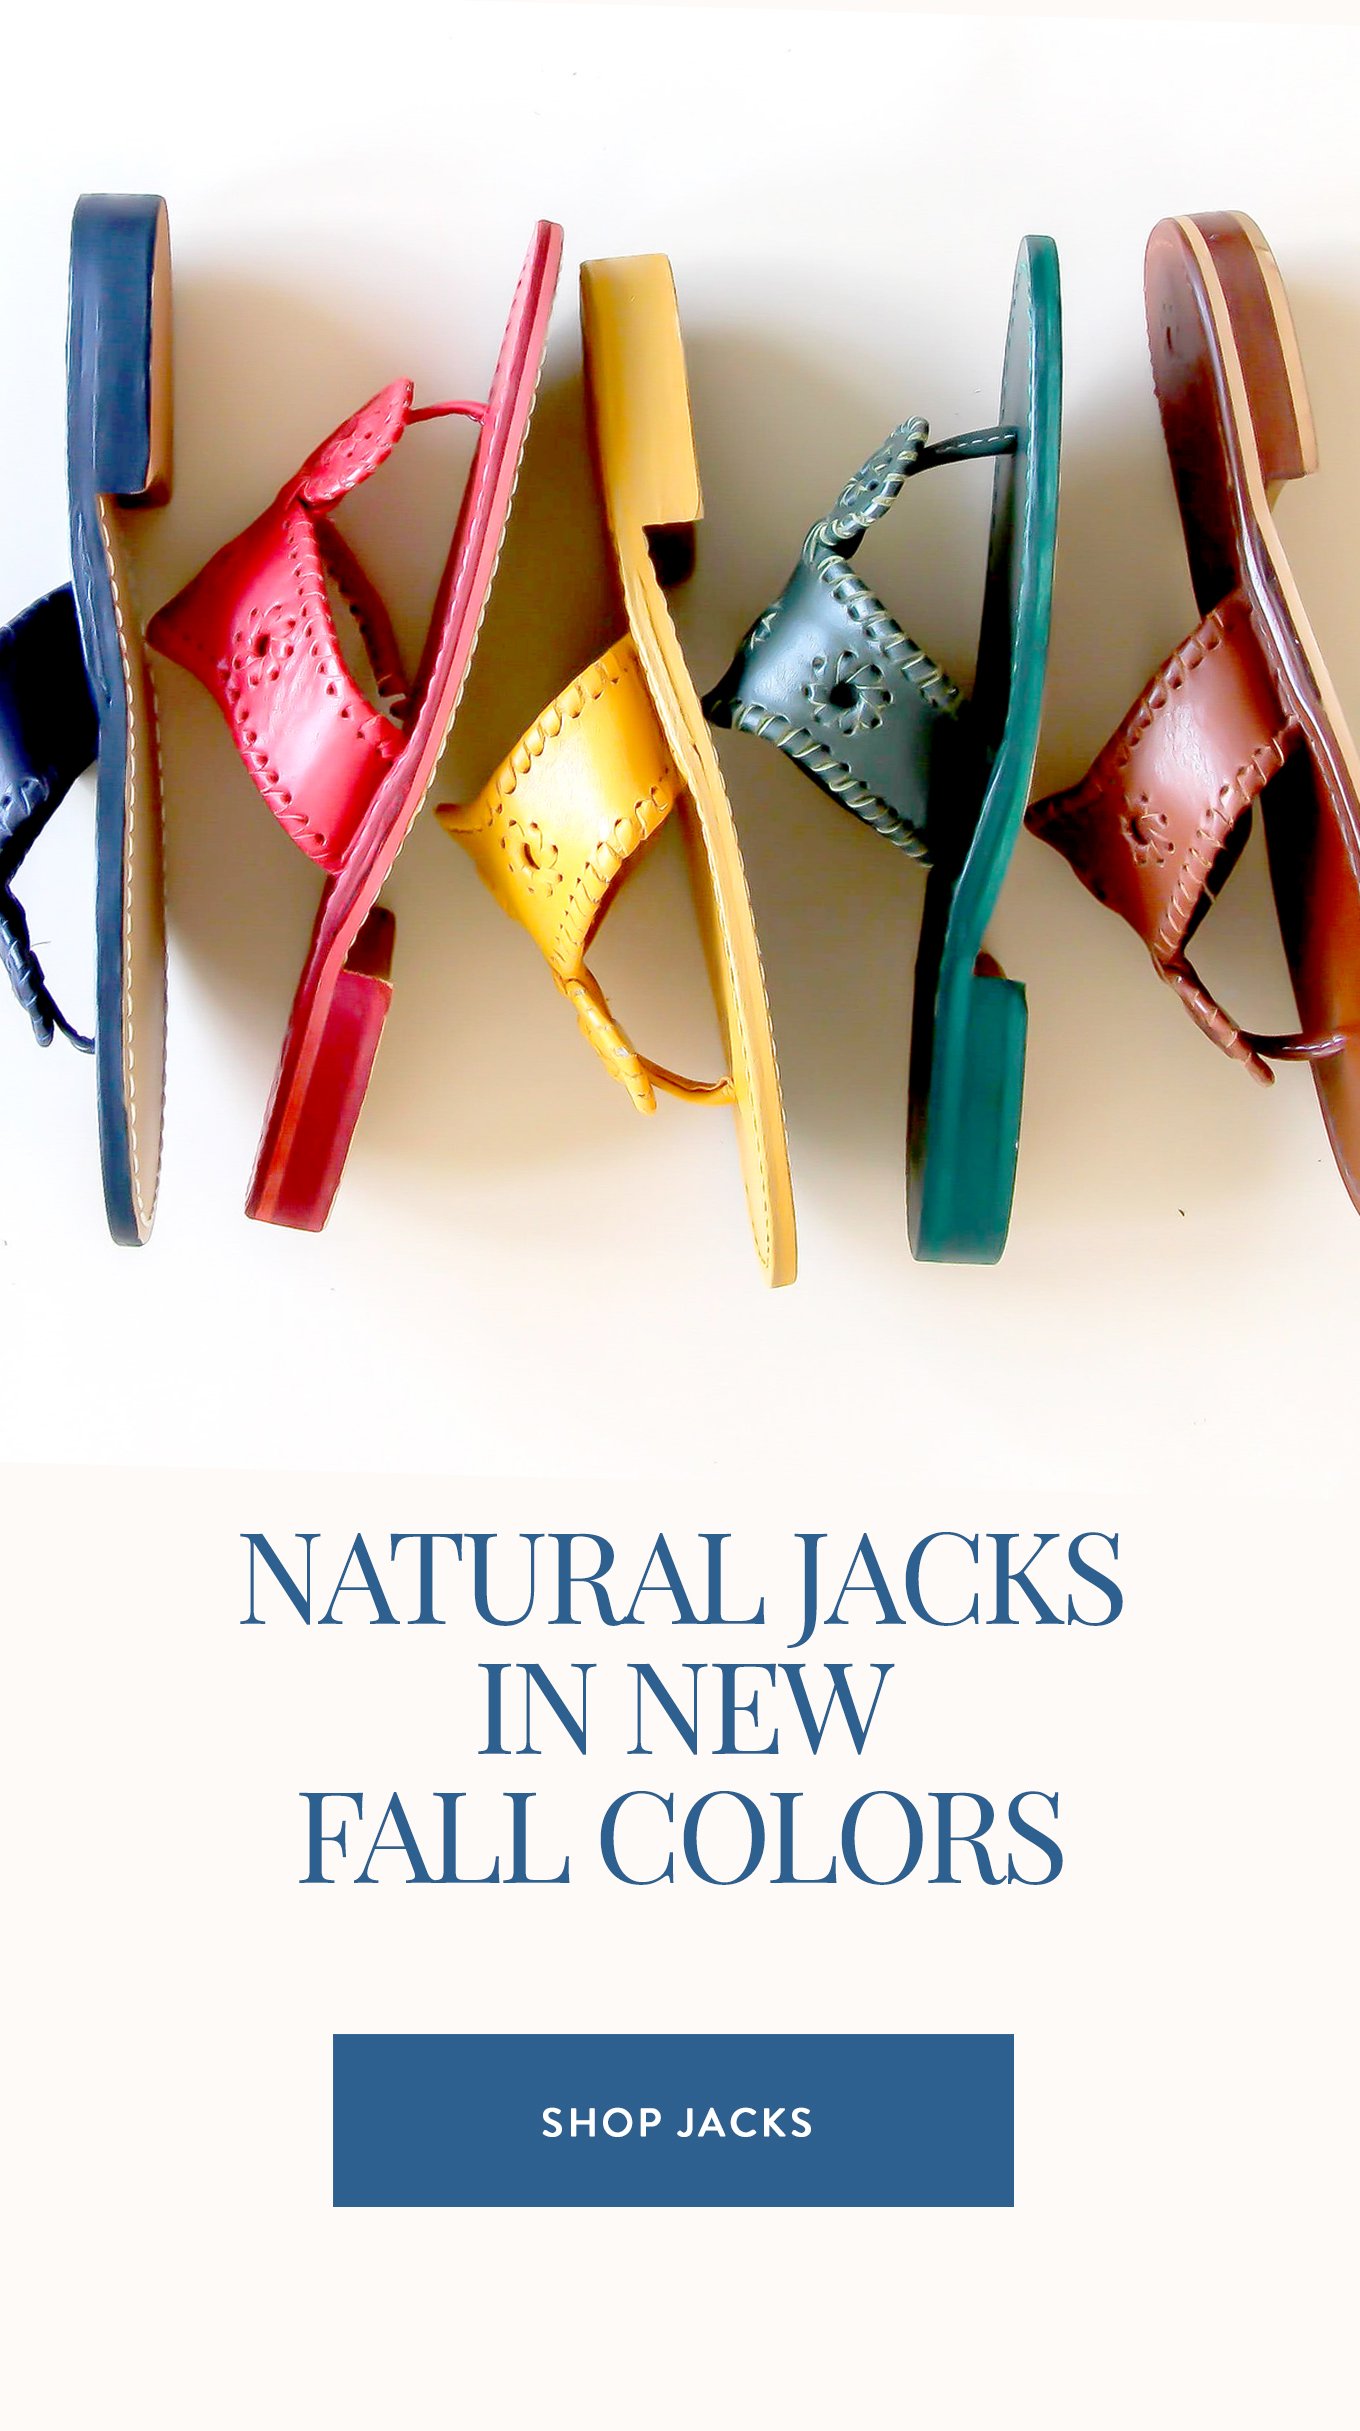 Natural, Jacks in New Colors | Milled